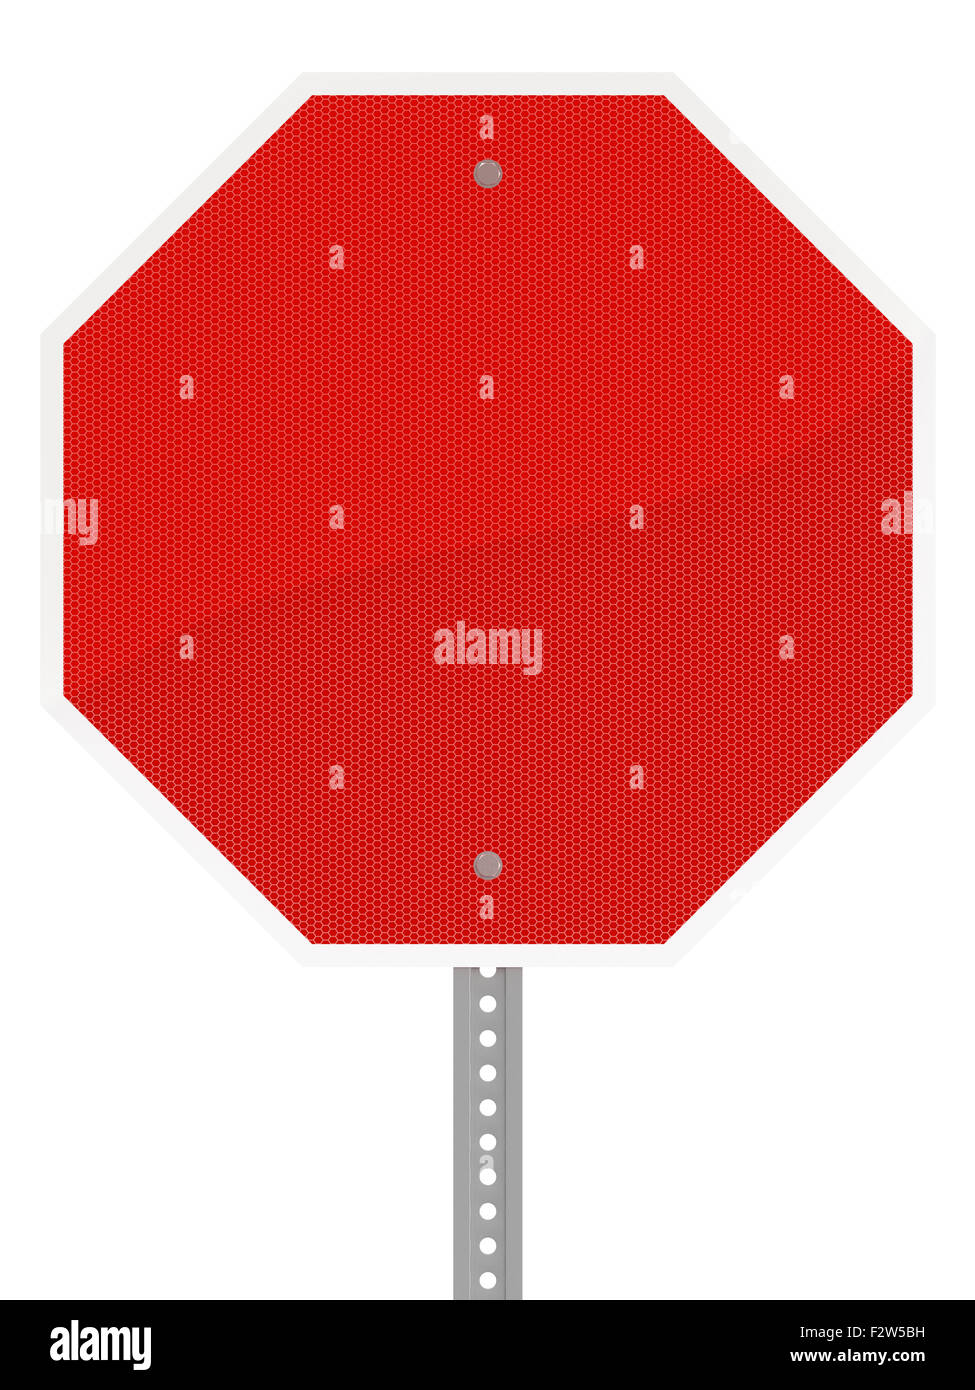 Glossy red hexagon stop sign isolated on a white background. Stock Photo